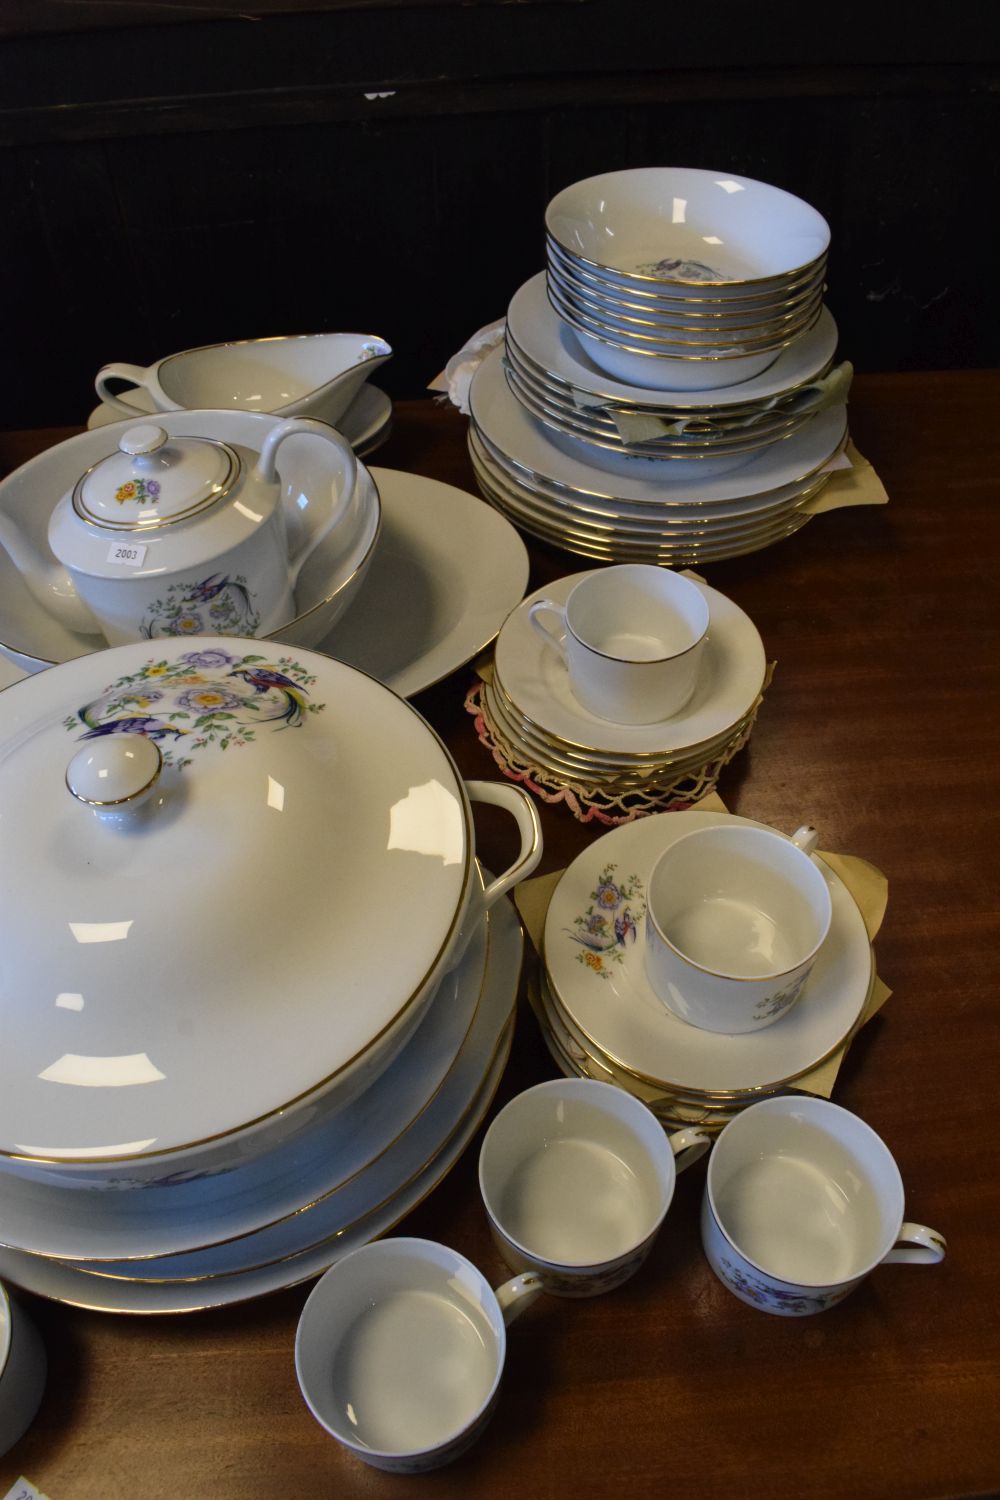 Extensive Limoges porcelain dinner and coffee service in the Royal Limoges pattern - Image 3 of 11